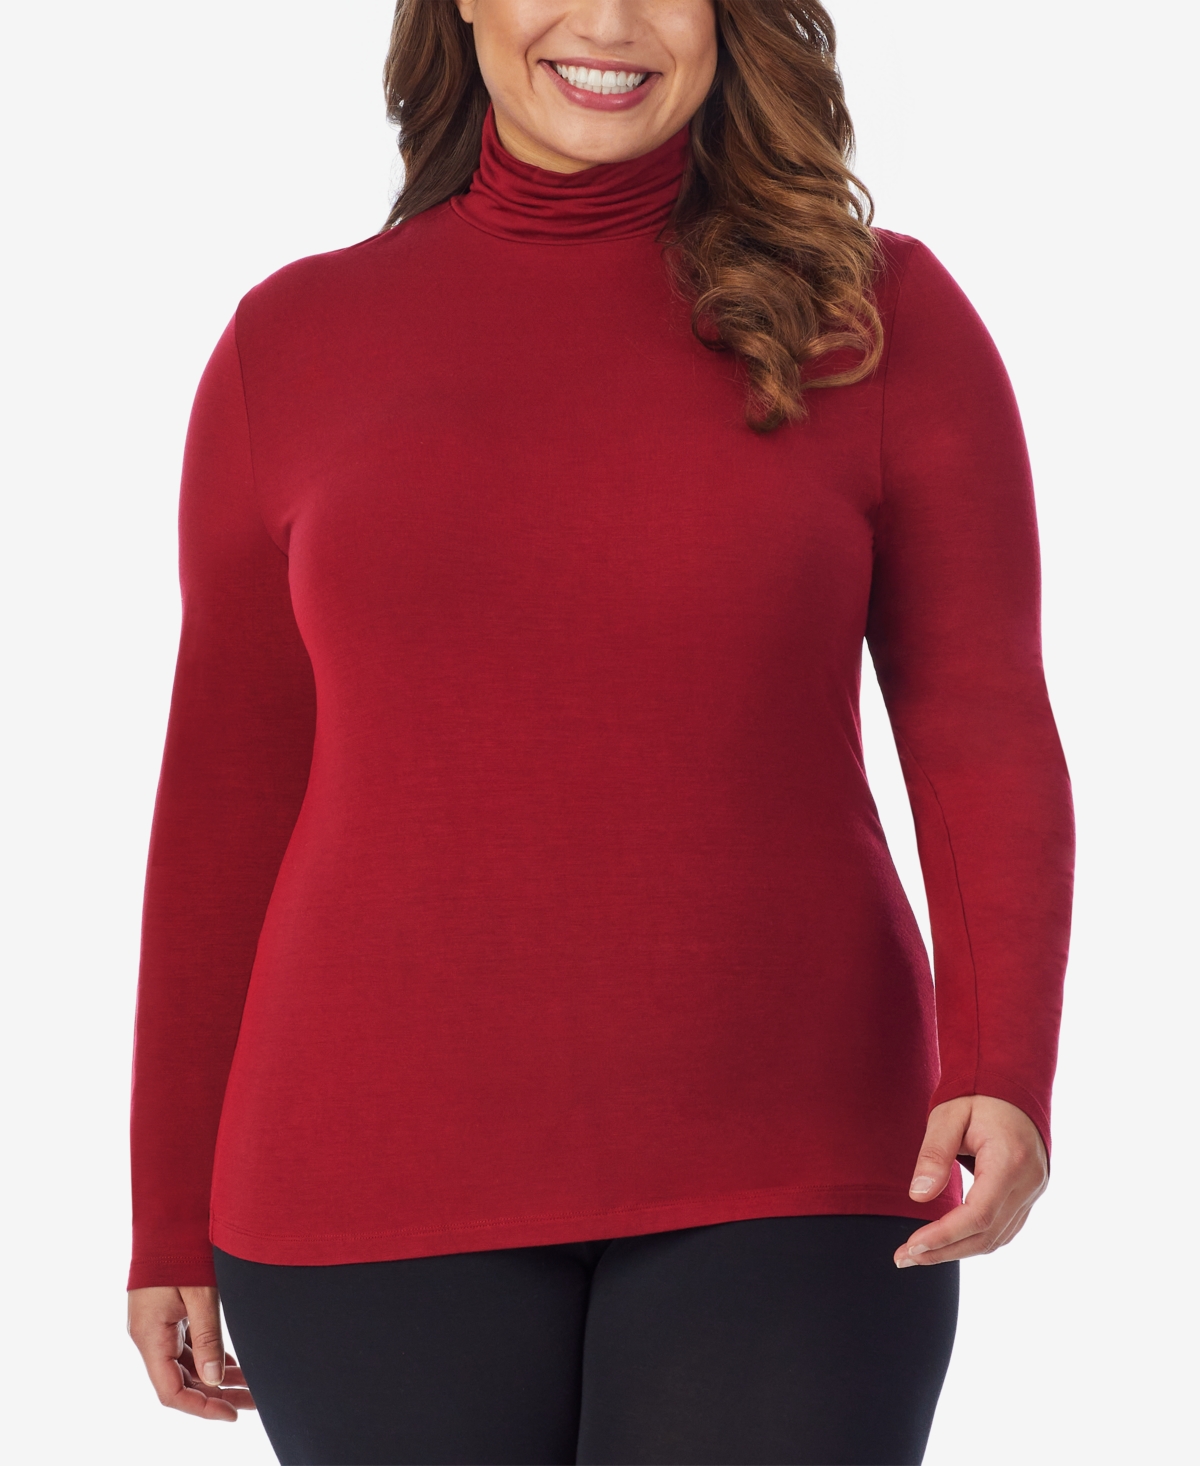 Plus Size Softwear with Stretch Turtleneck - Charcoal